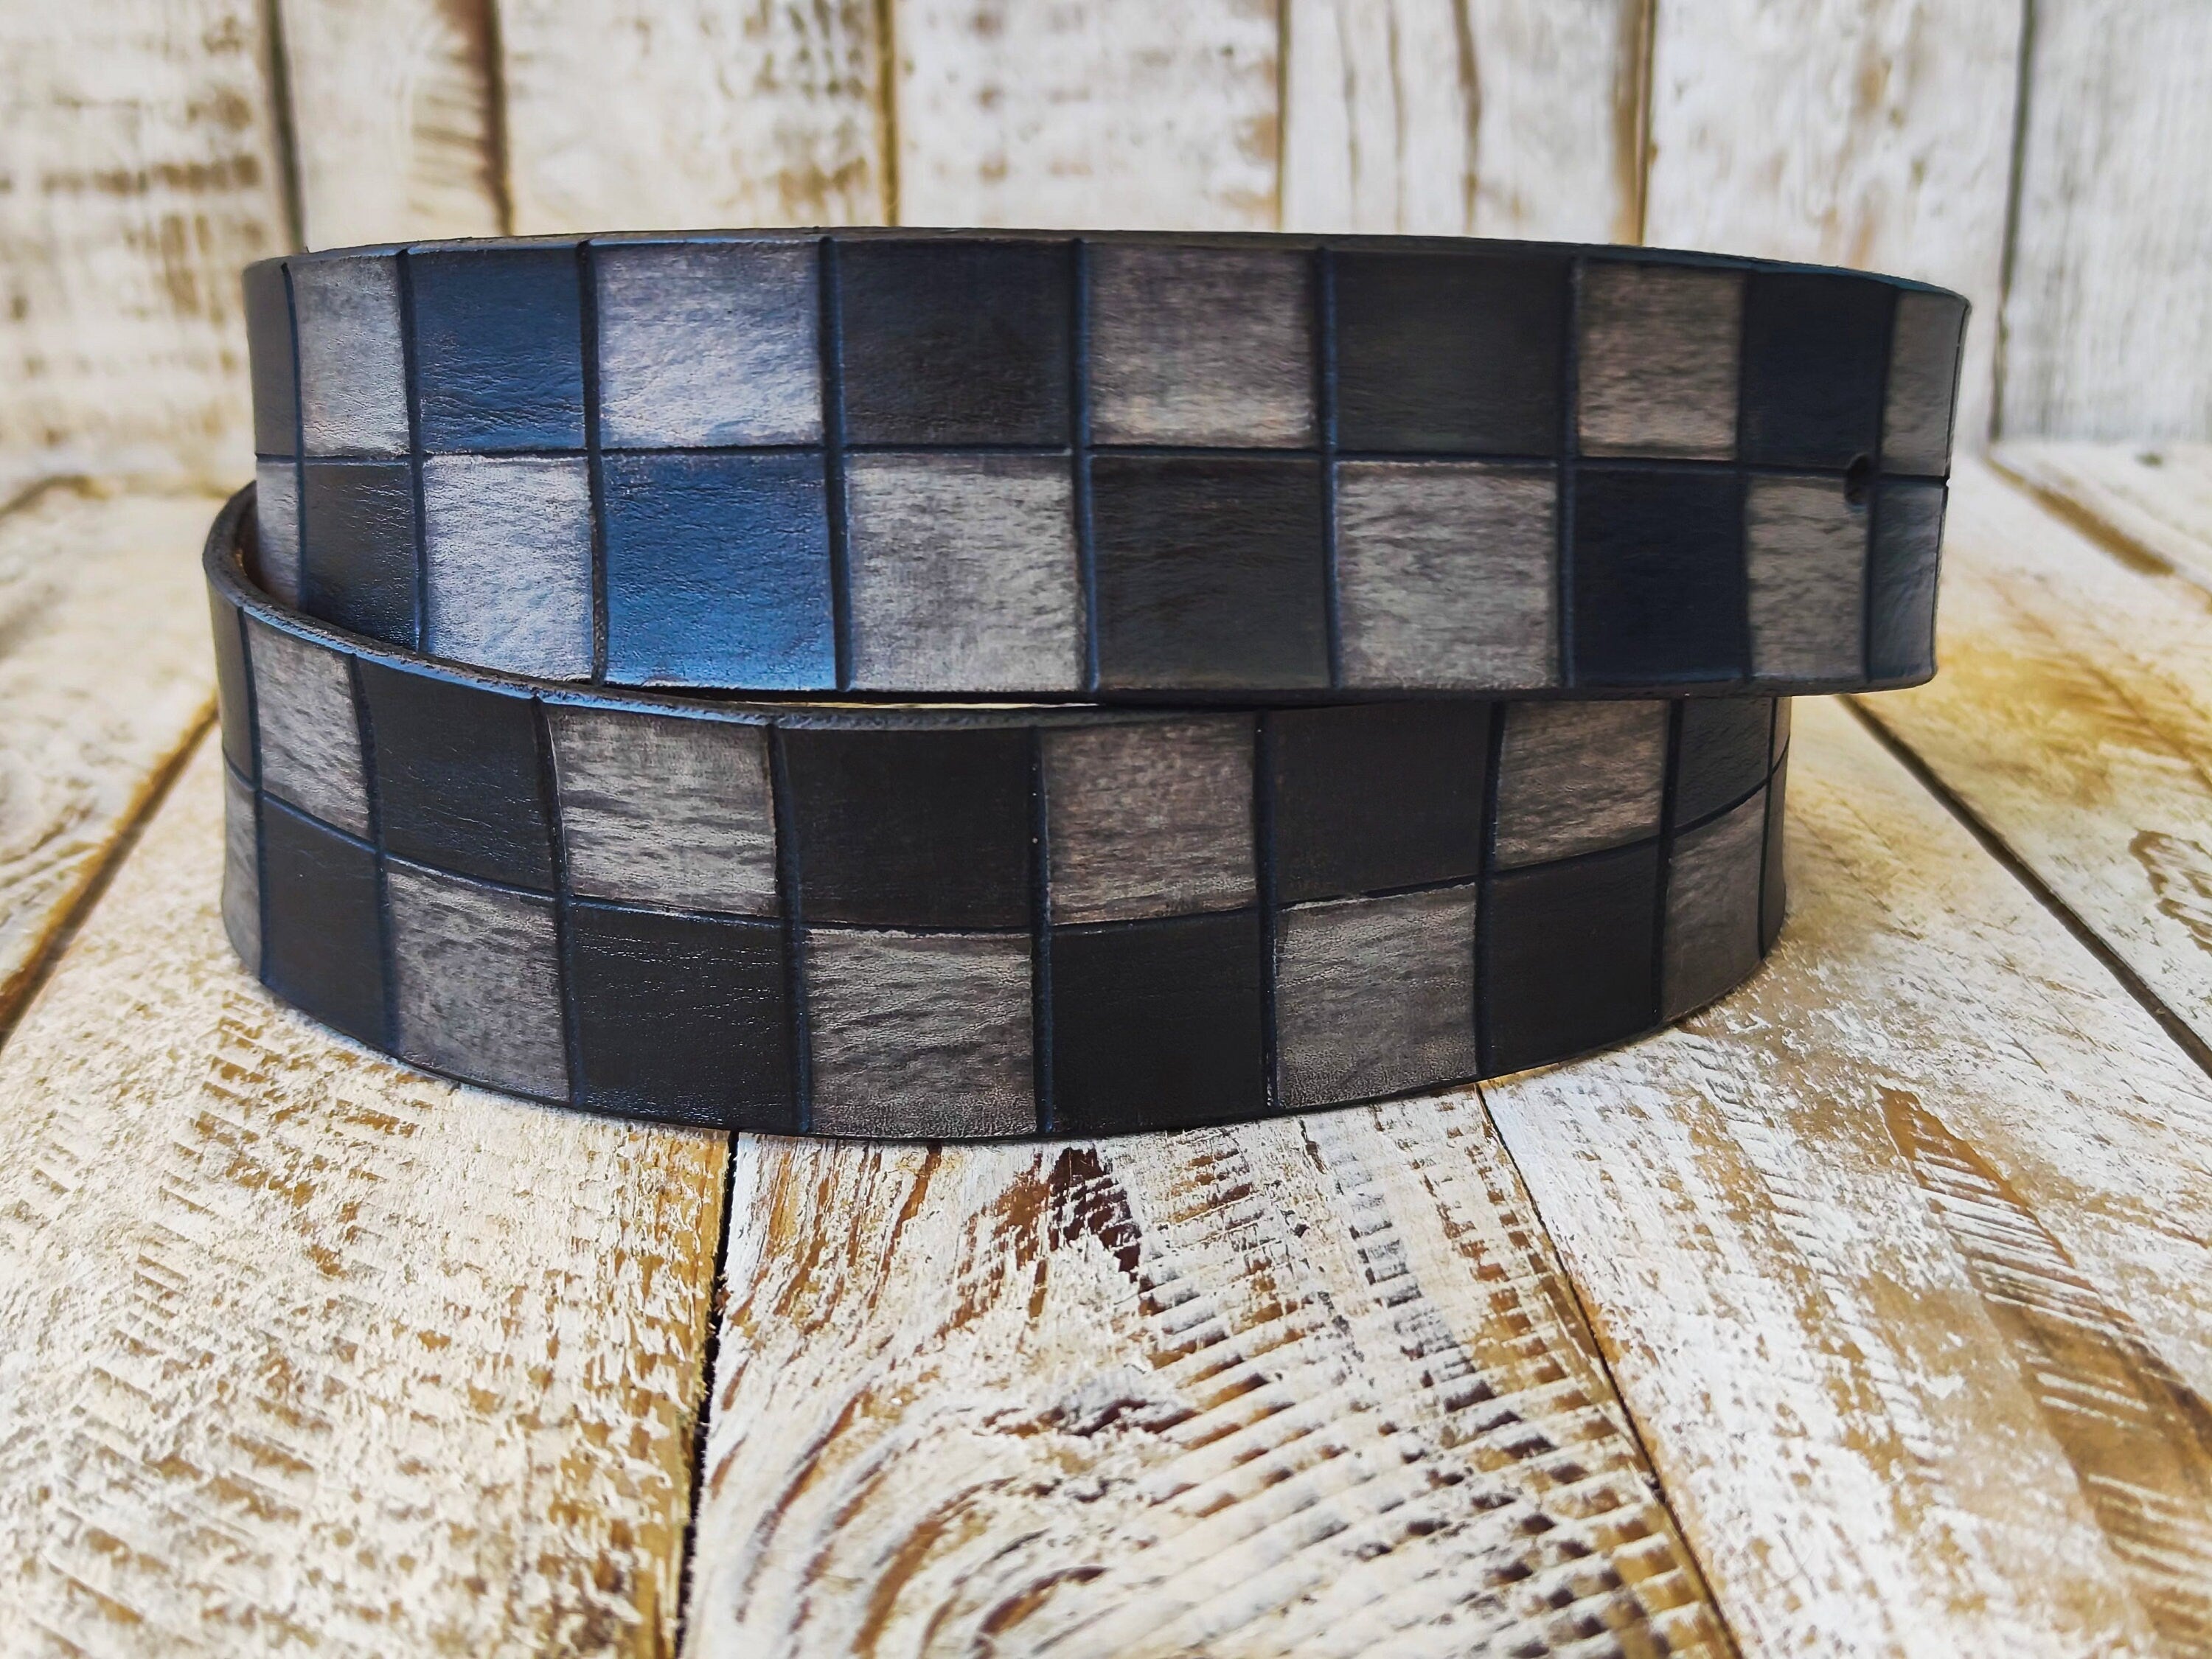 Black and Gray Checkered Leather Belt with Silver Buckle and black wash. Handmade product by Ishaor, A Statement Piece for Any Outfit.